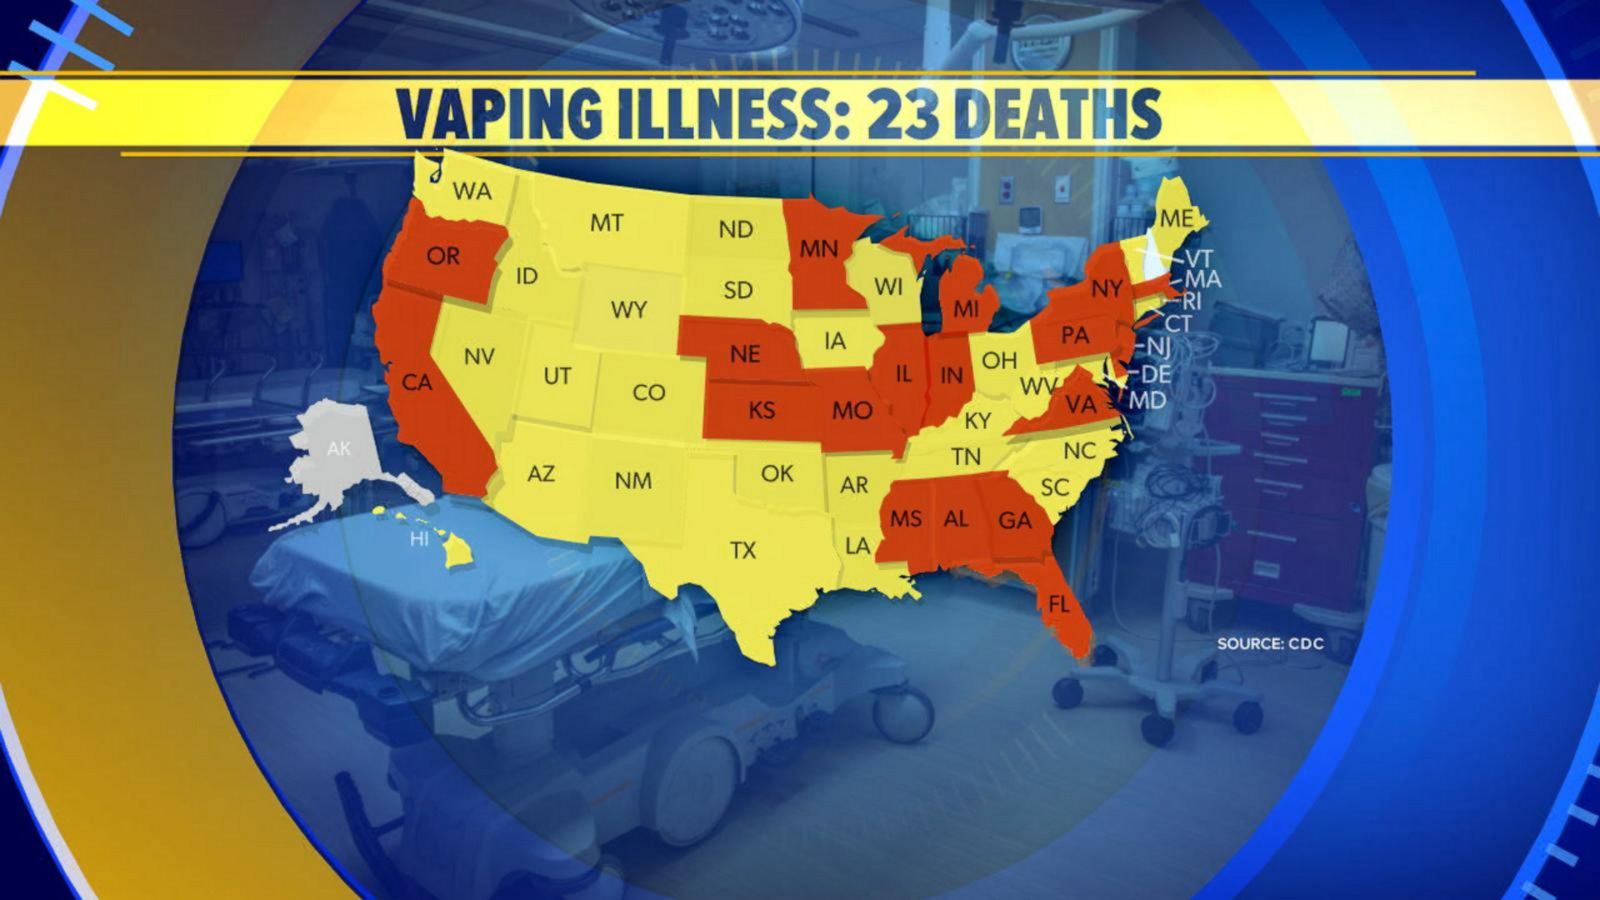 VIDEO: 17-year-old becomes youngest to reportedly die from vaping